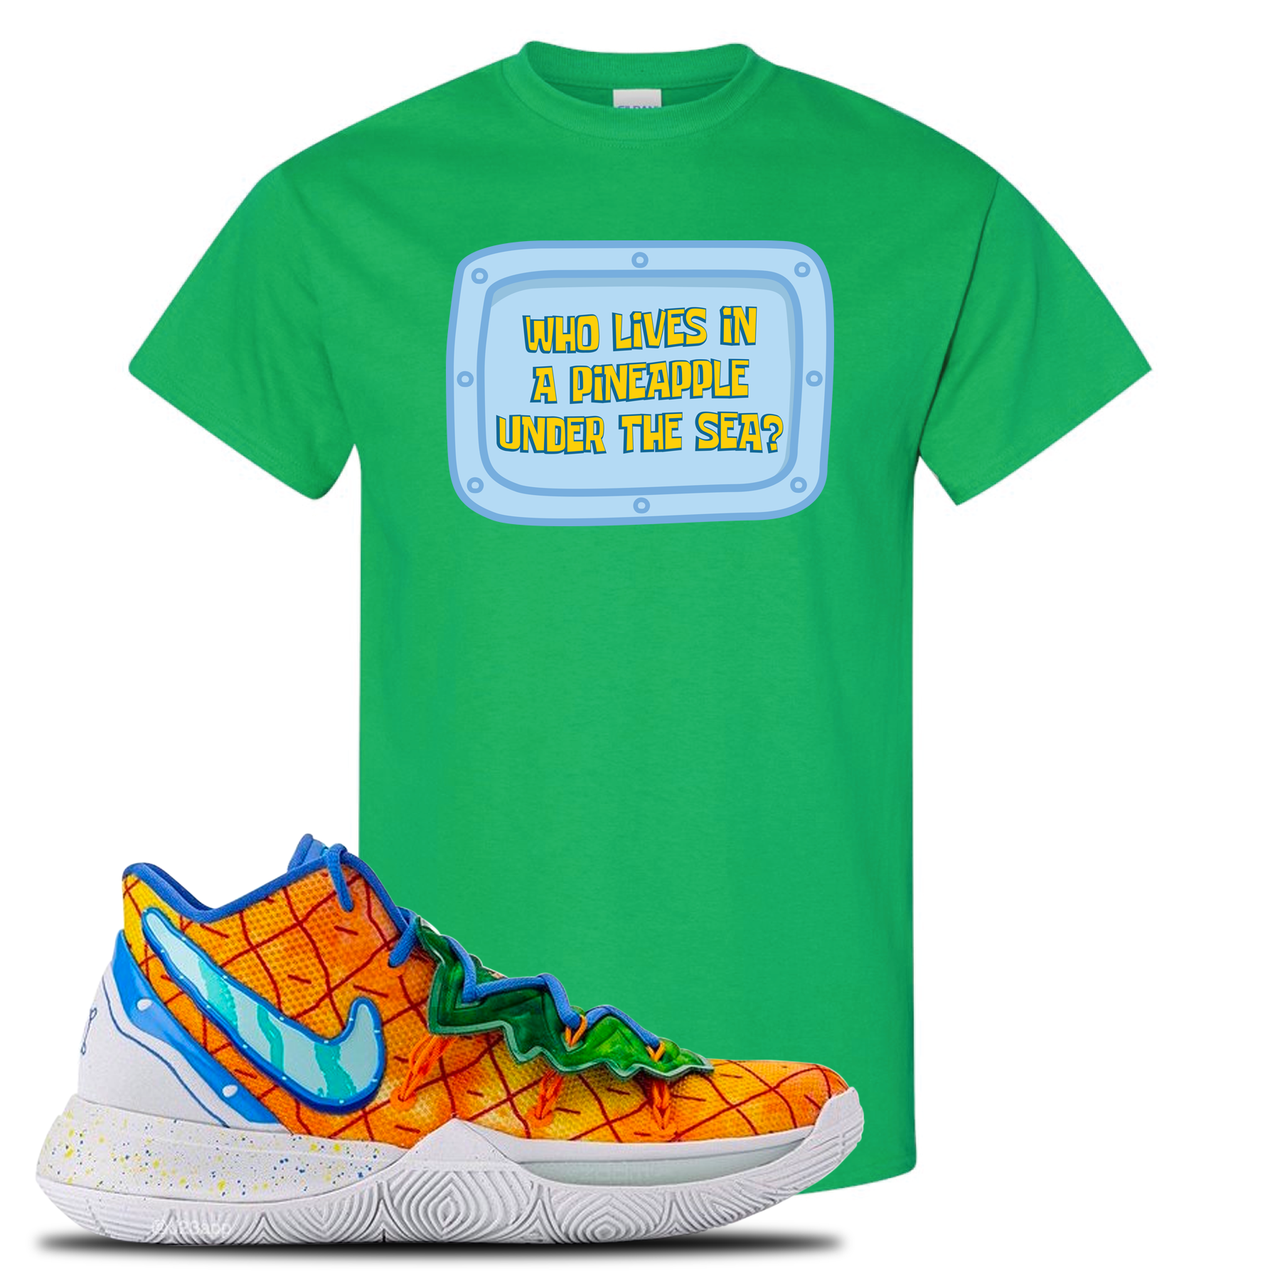 Kyrie 5 Pineapple House Who Lives in a Pineapple Under the Sea? Irish Green Sneaker Hook Up T-Shirt